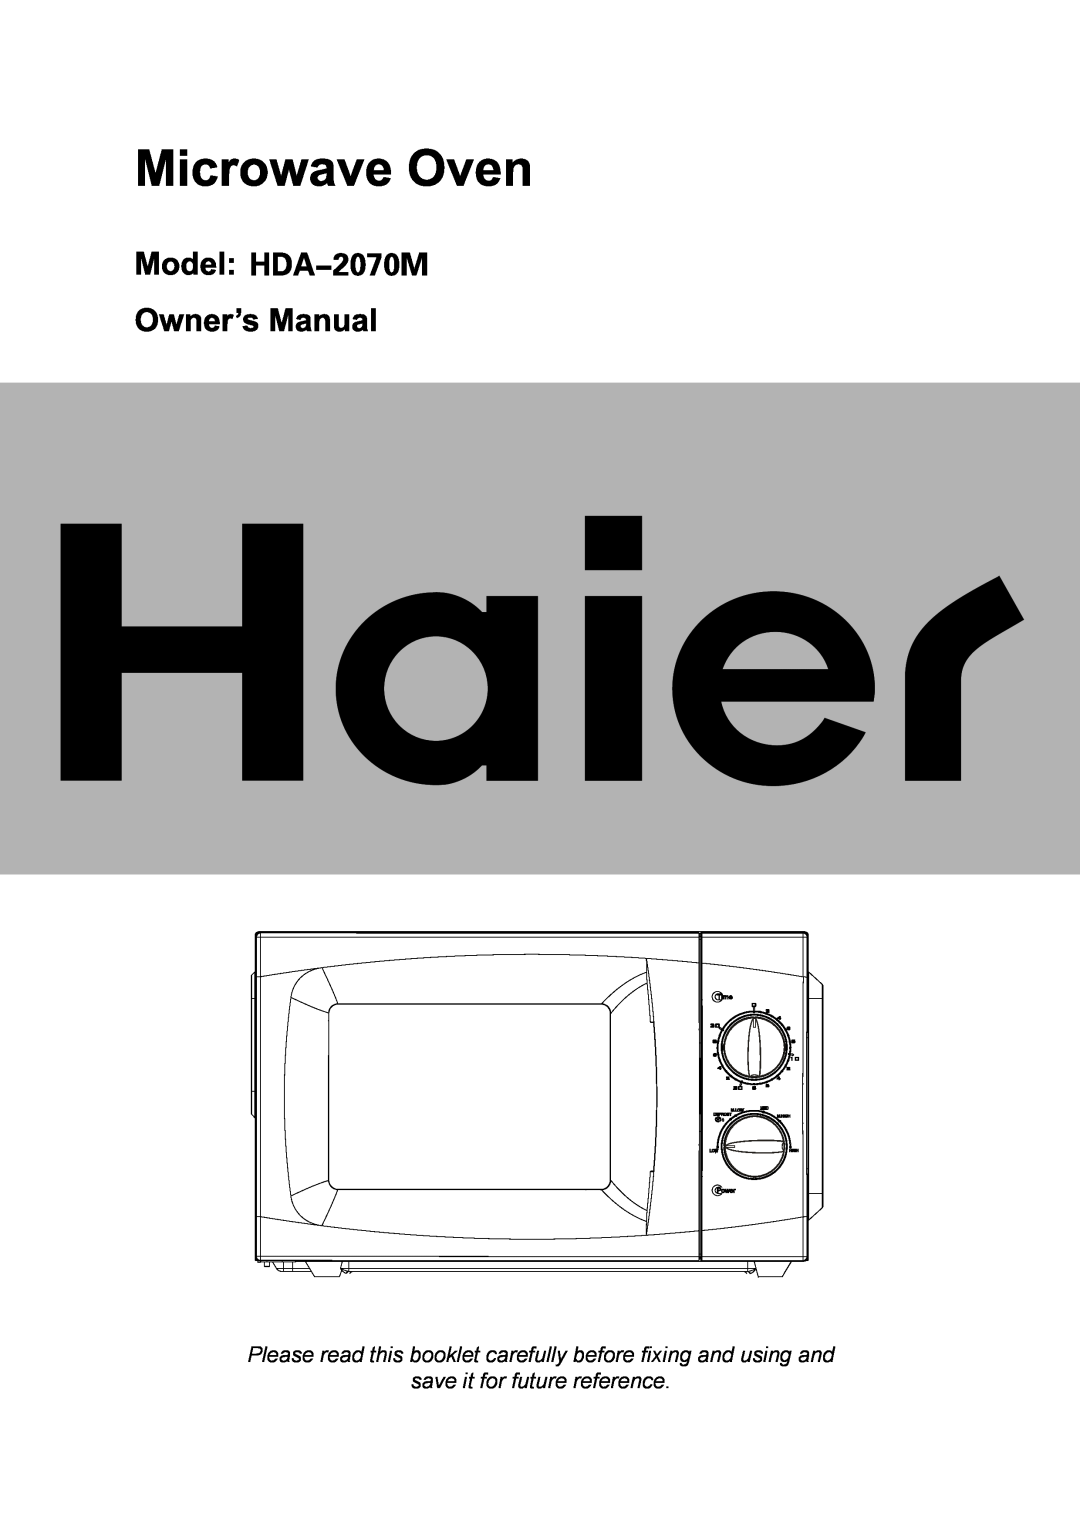 Haier HDA-2070M manual Please read this booklet carefully before fixing and using and, save it for future reference 